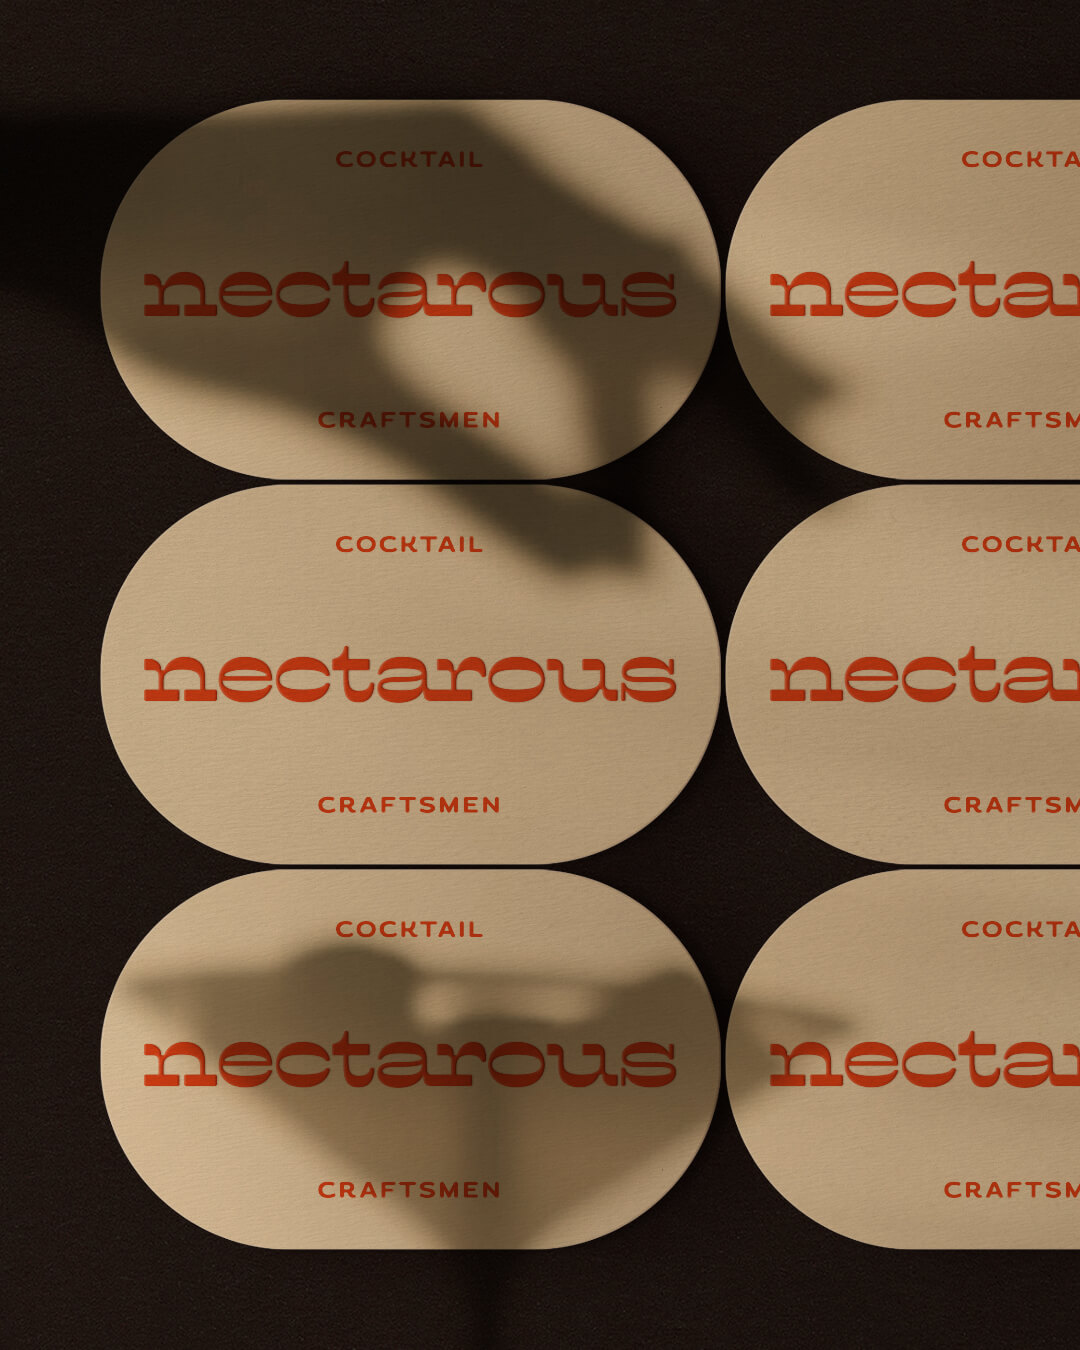 Martini glass shadow cast across rounded business card designs with embossed 'Nectarous' logo for an Australian mixology service.